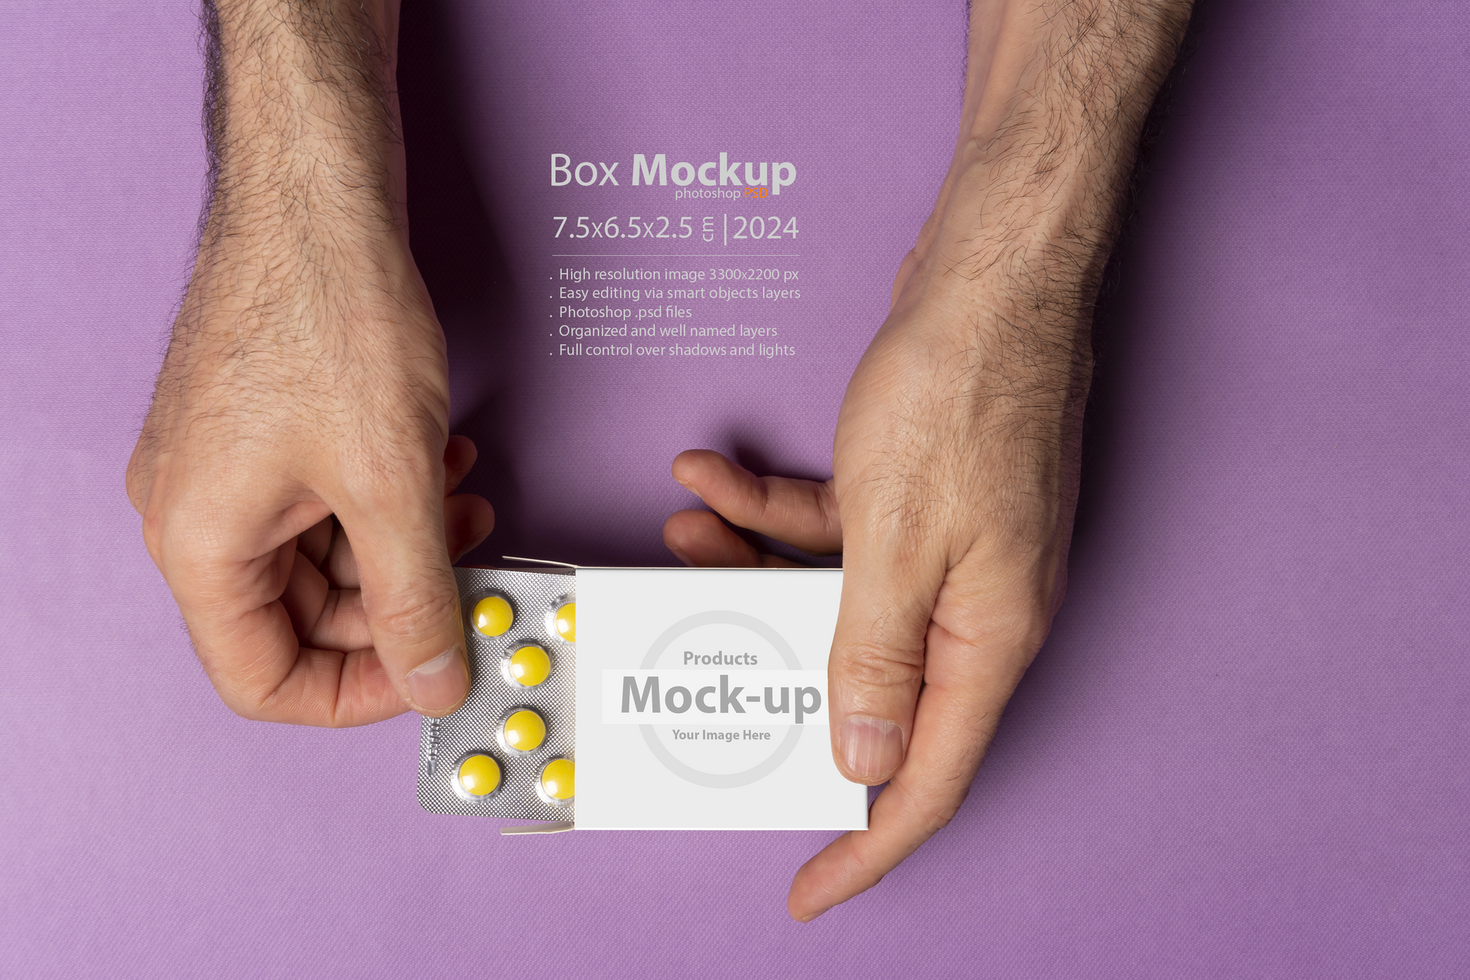 Male hand bringing out pills tablet from box in front of purple background mock-up series psd